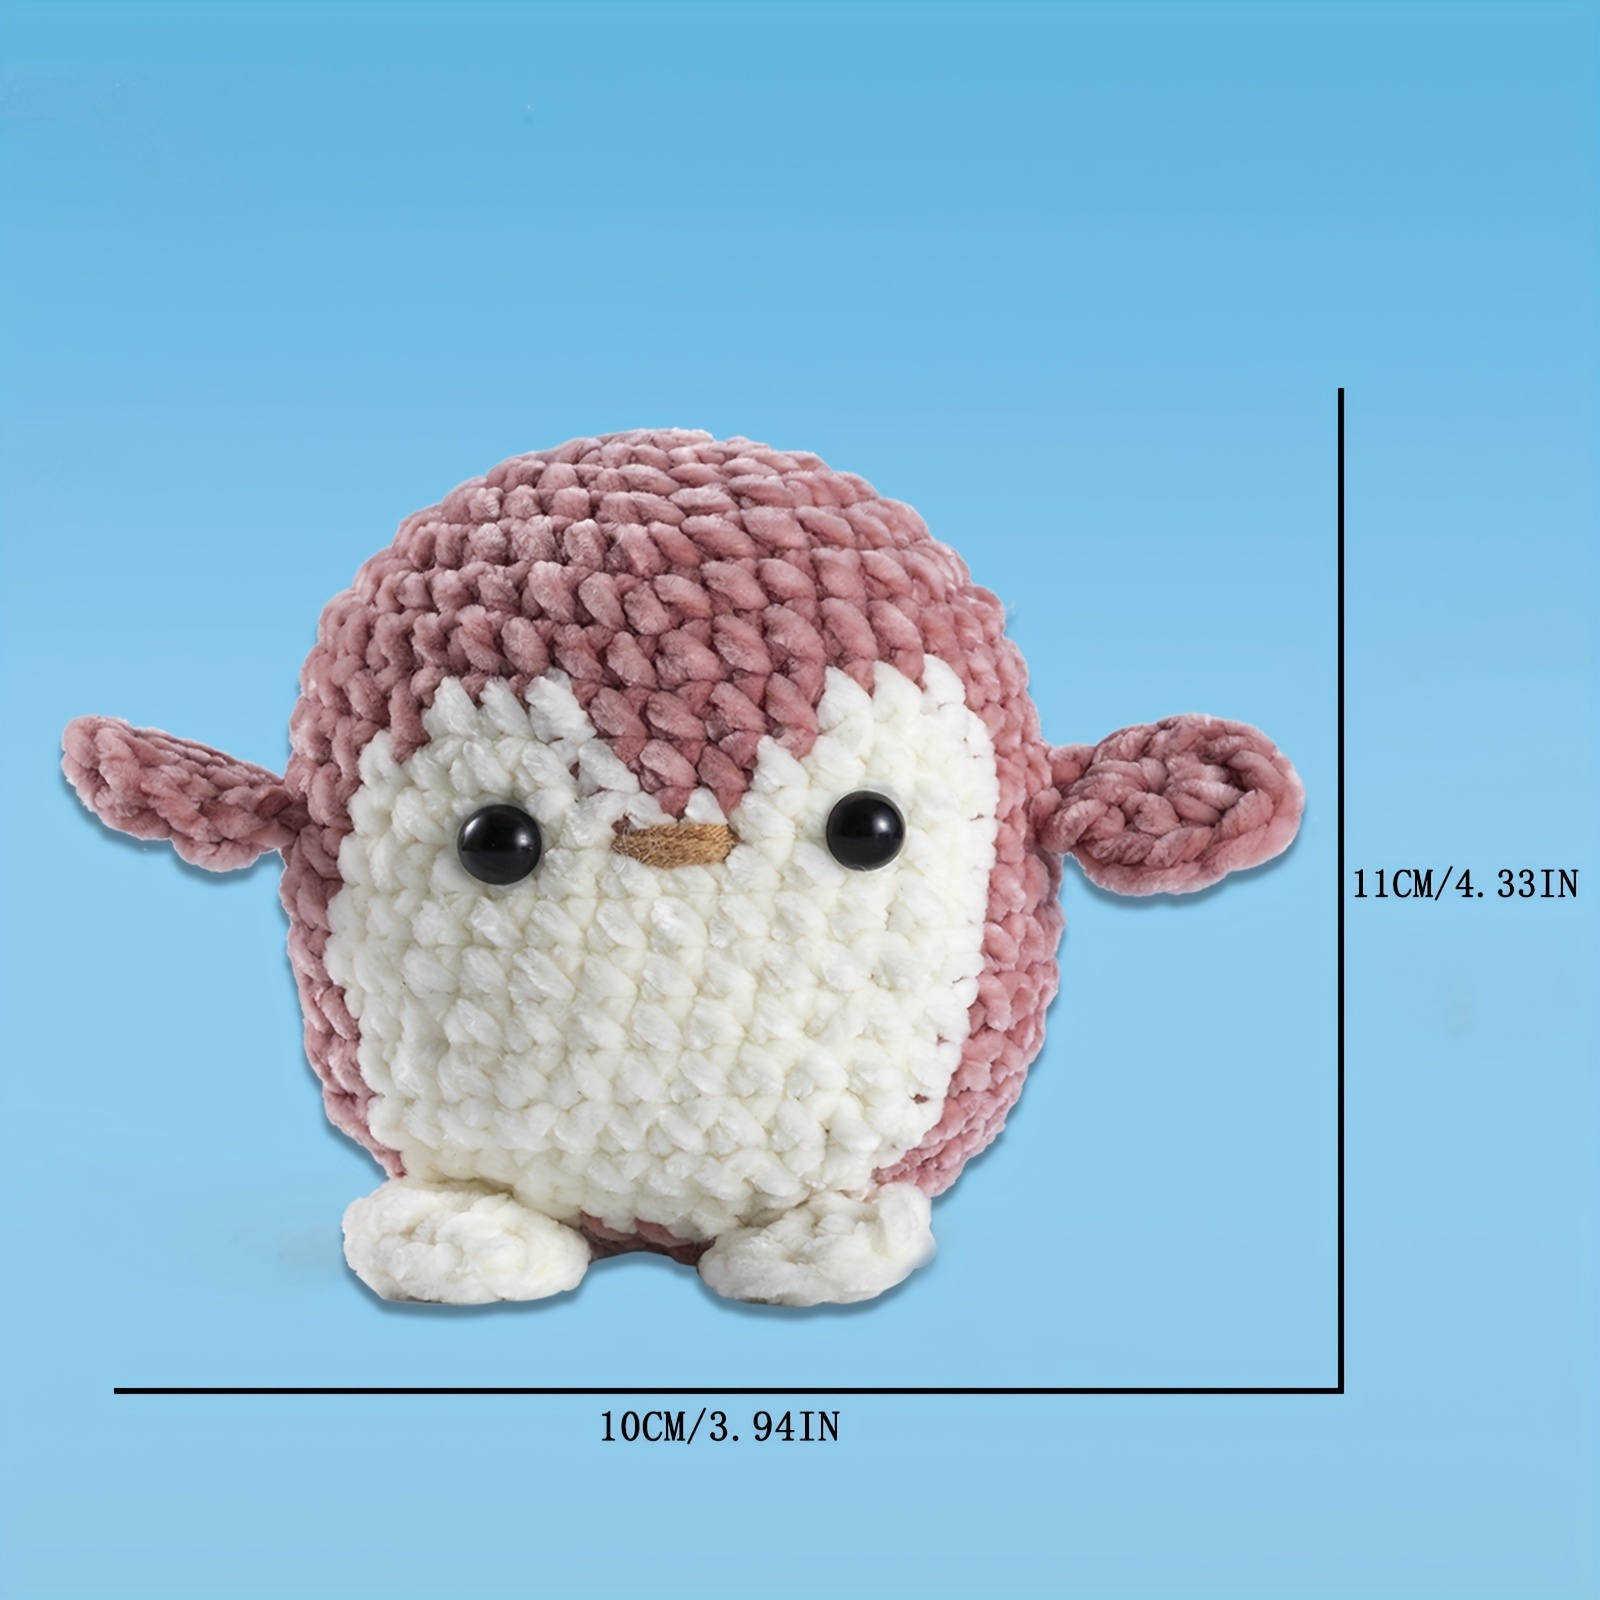 Crochet Kit Material Pack Designed For Newcomers - Temu